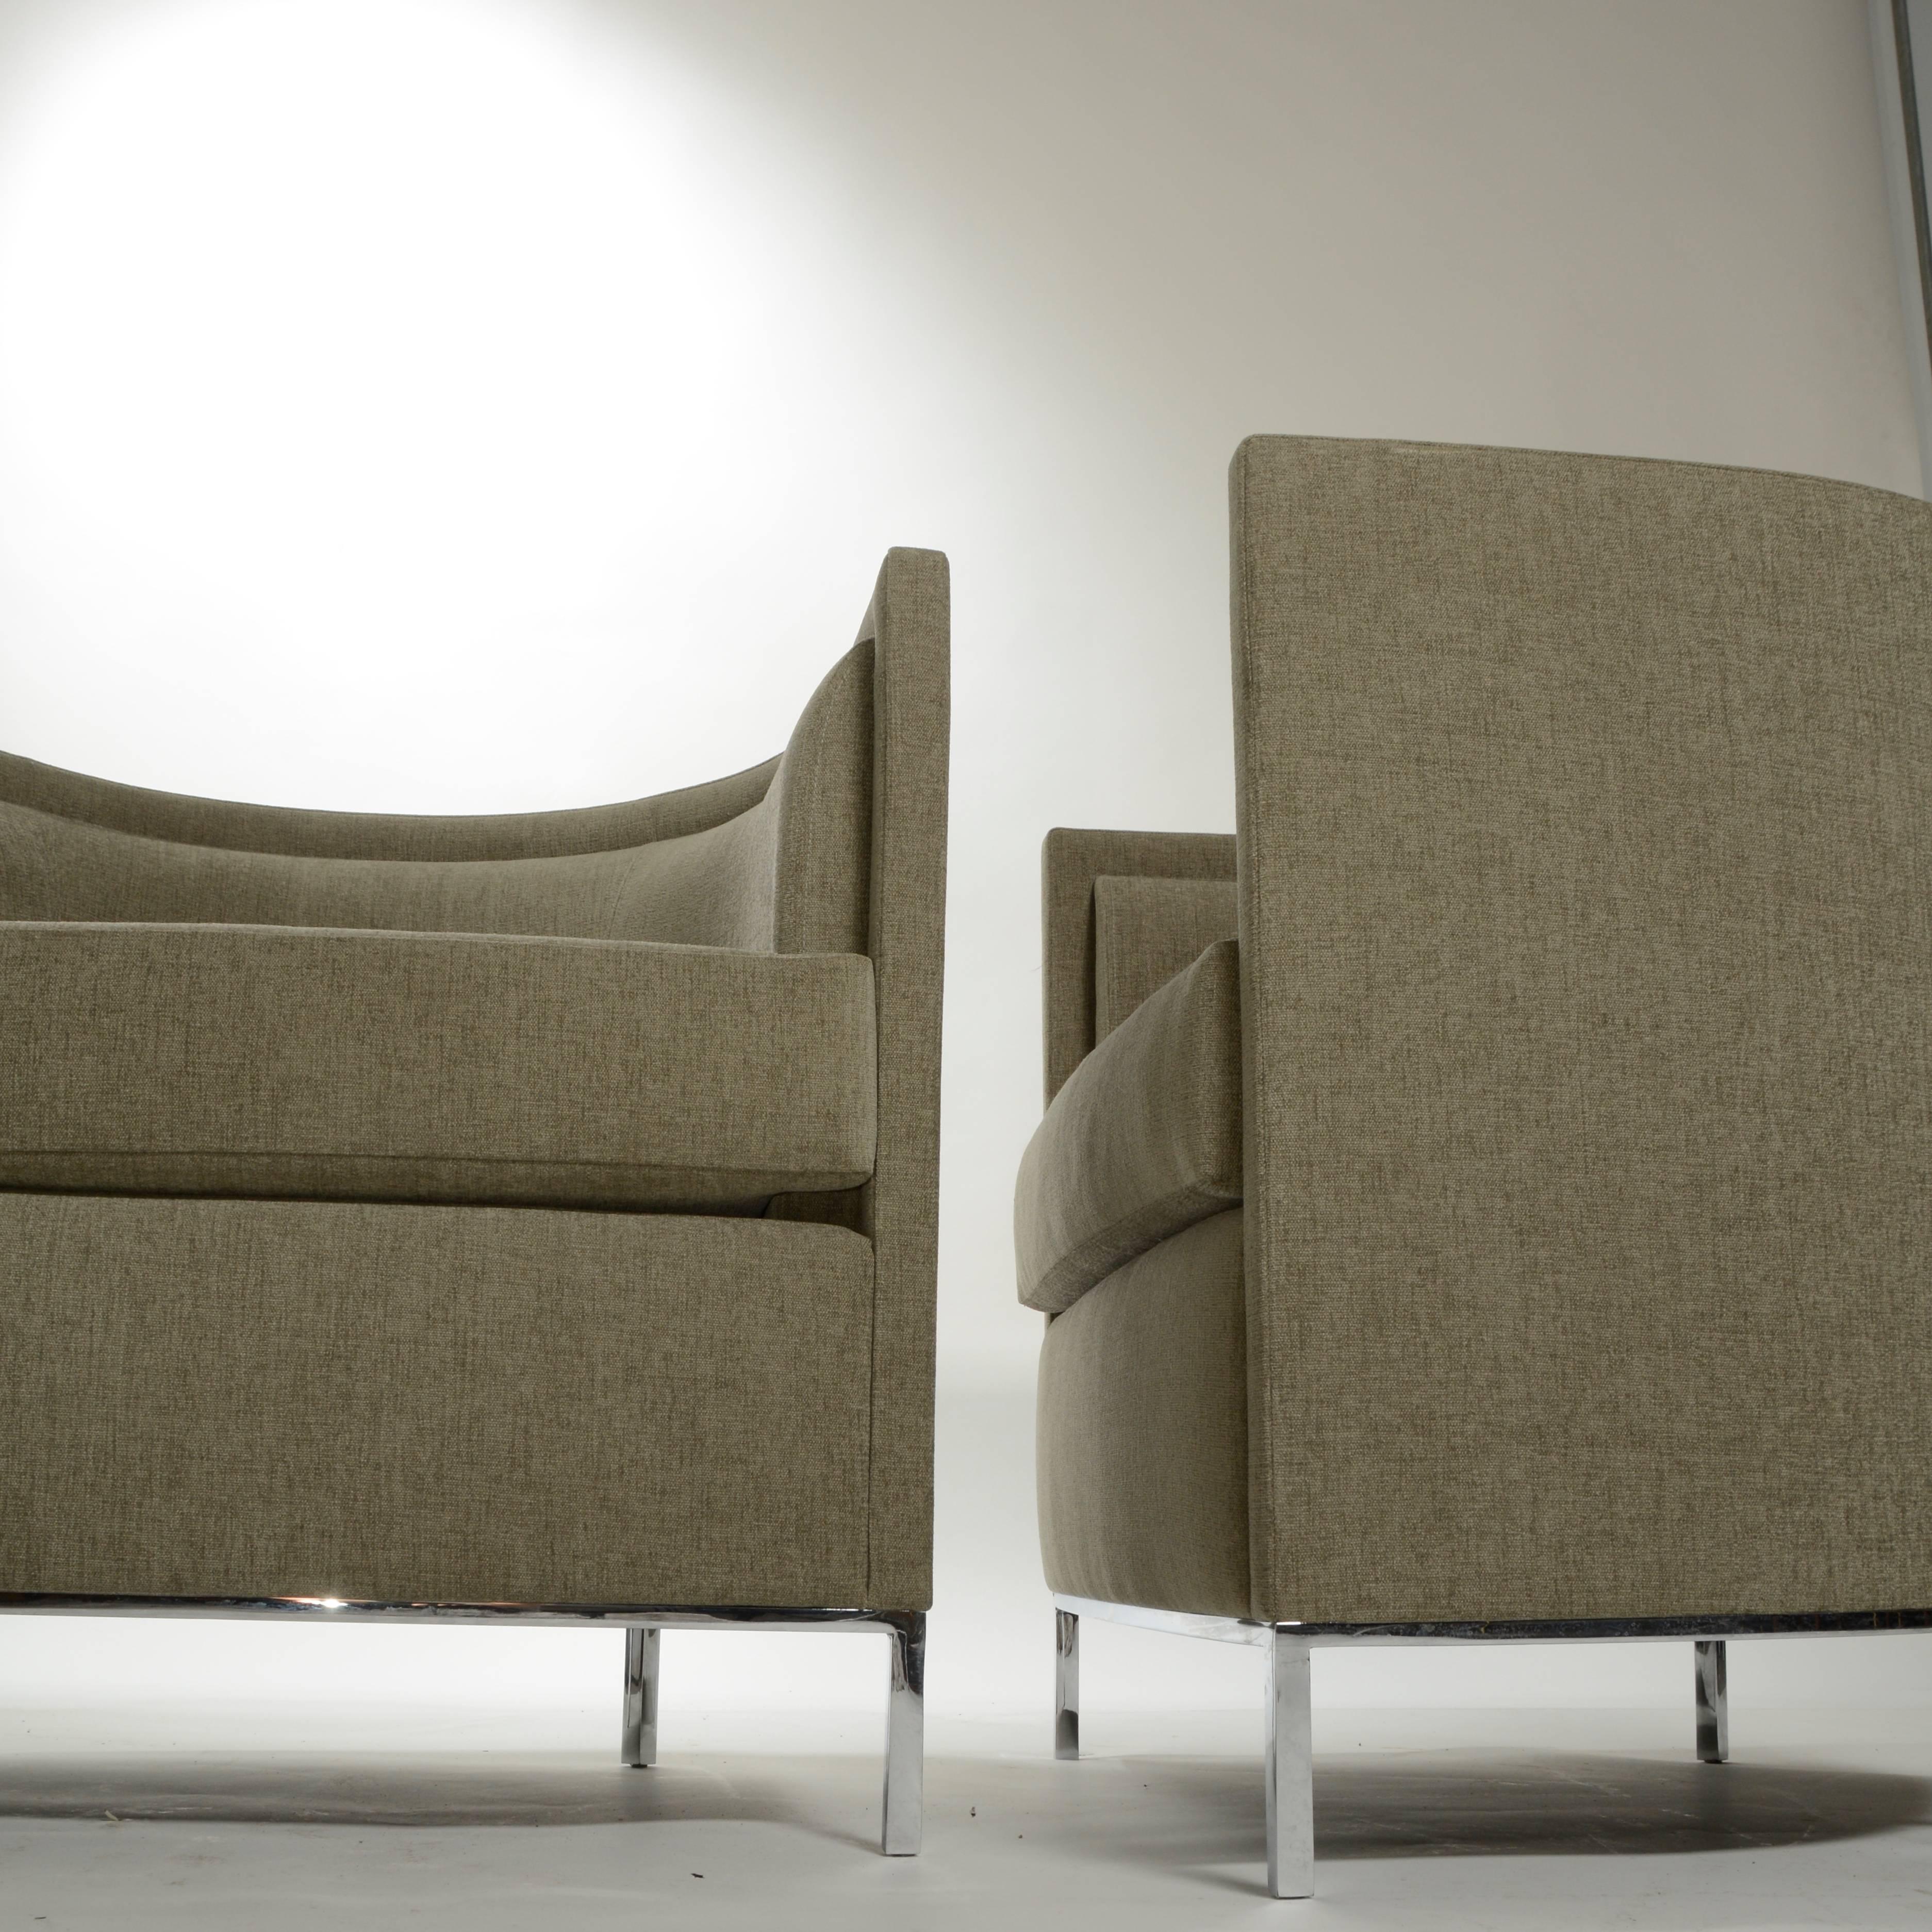 These are contemporary California modern club chairs by Martin Brattrud of Los Angeles. They are in excellent condition. Price is for the pair. 
This pair is locate at our Downtown Los Angeles location. Please contact for details.